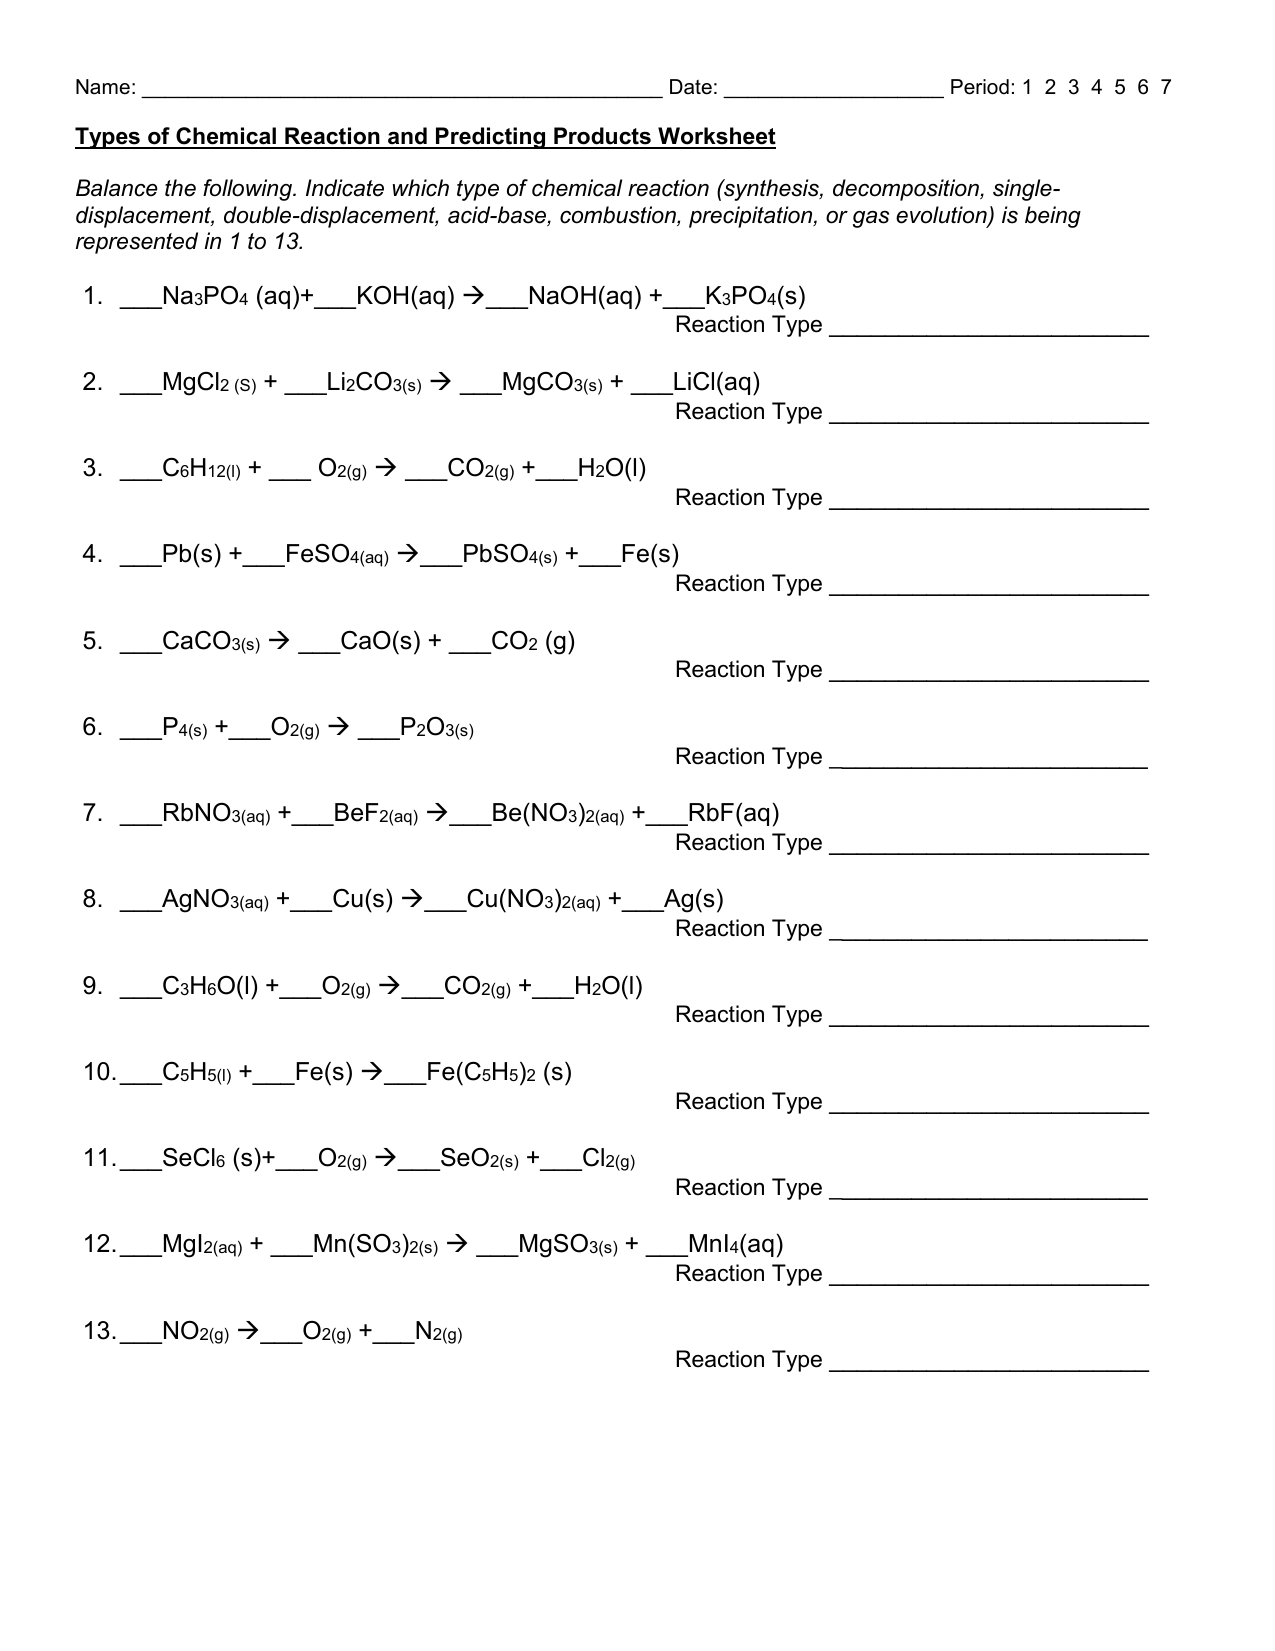 Types of Chemical Reaction and Predicting Products Worksheet Within Chemical Reactions Types Worksheet